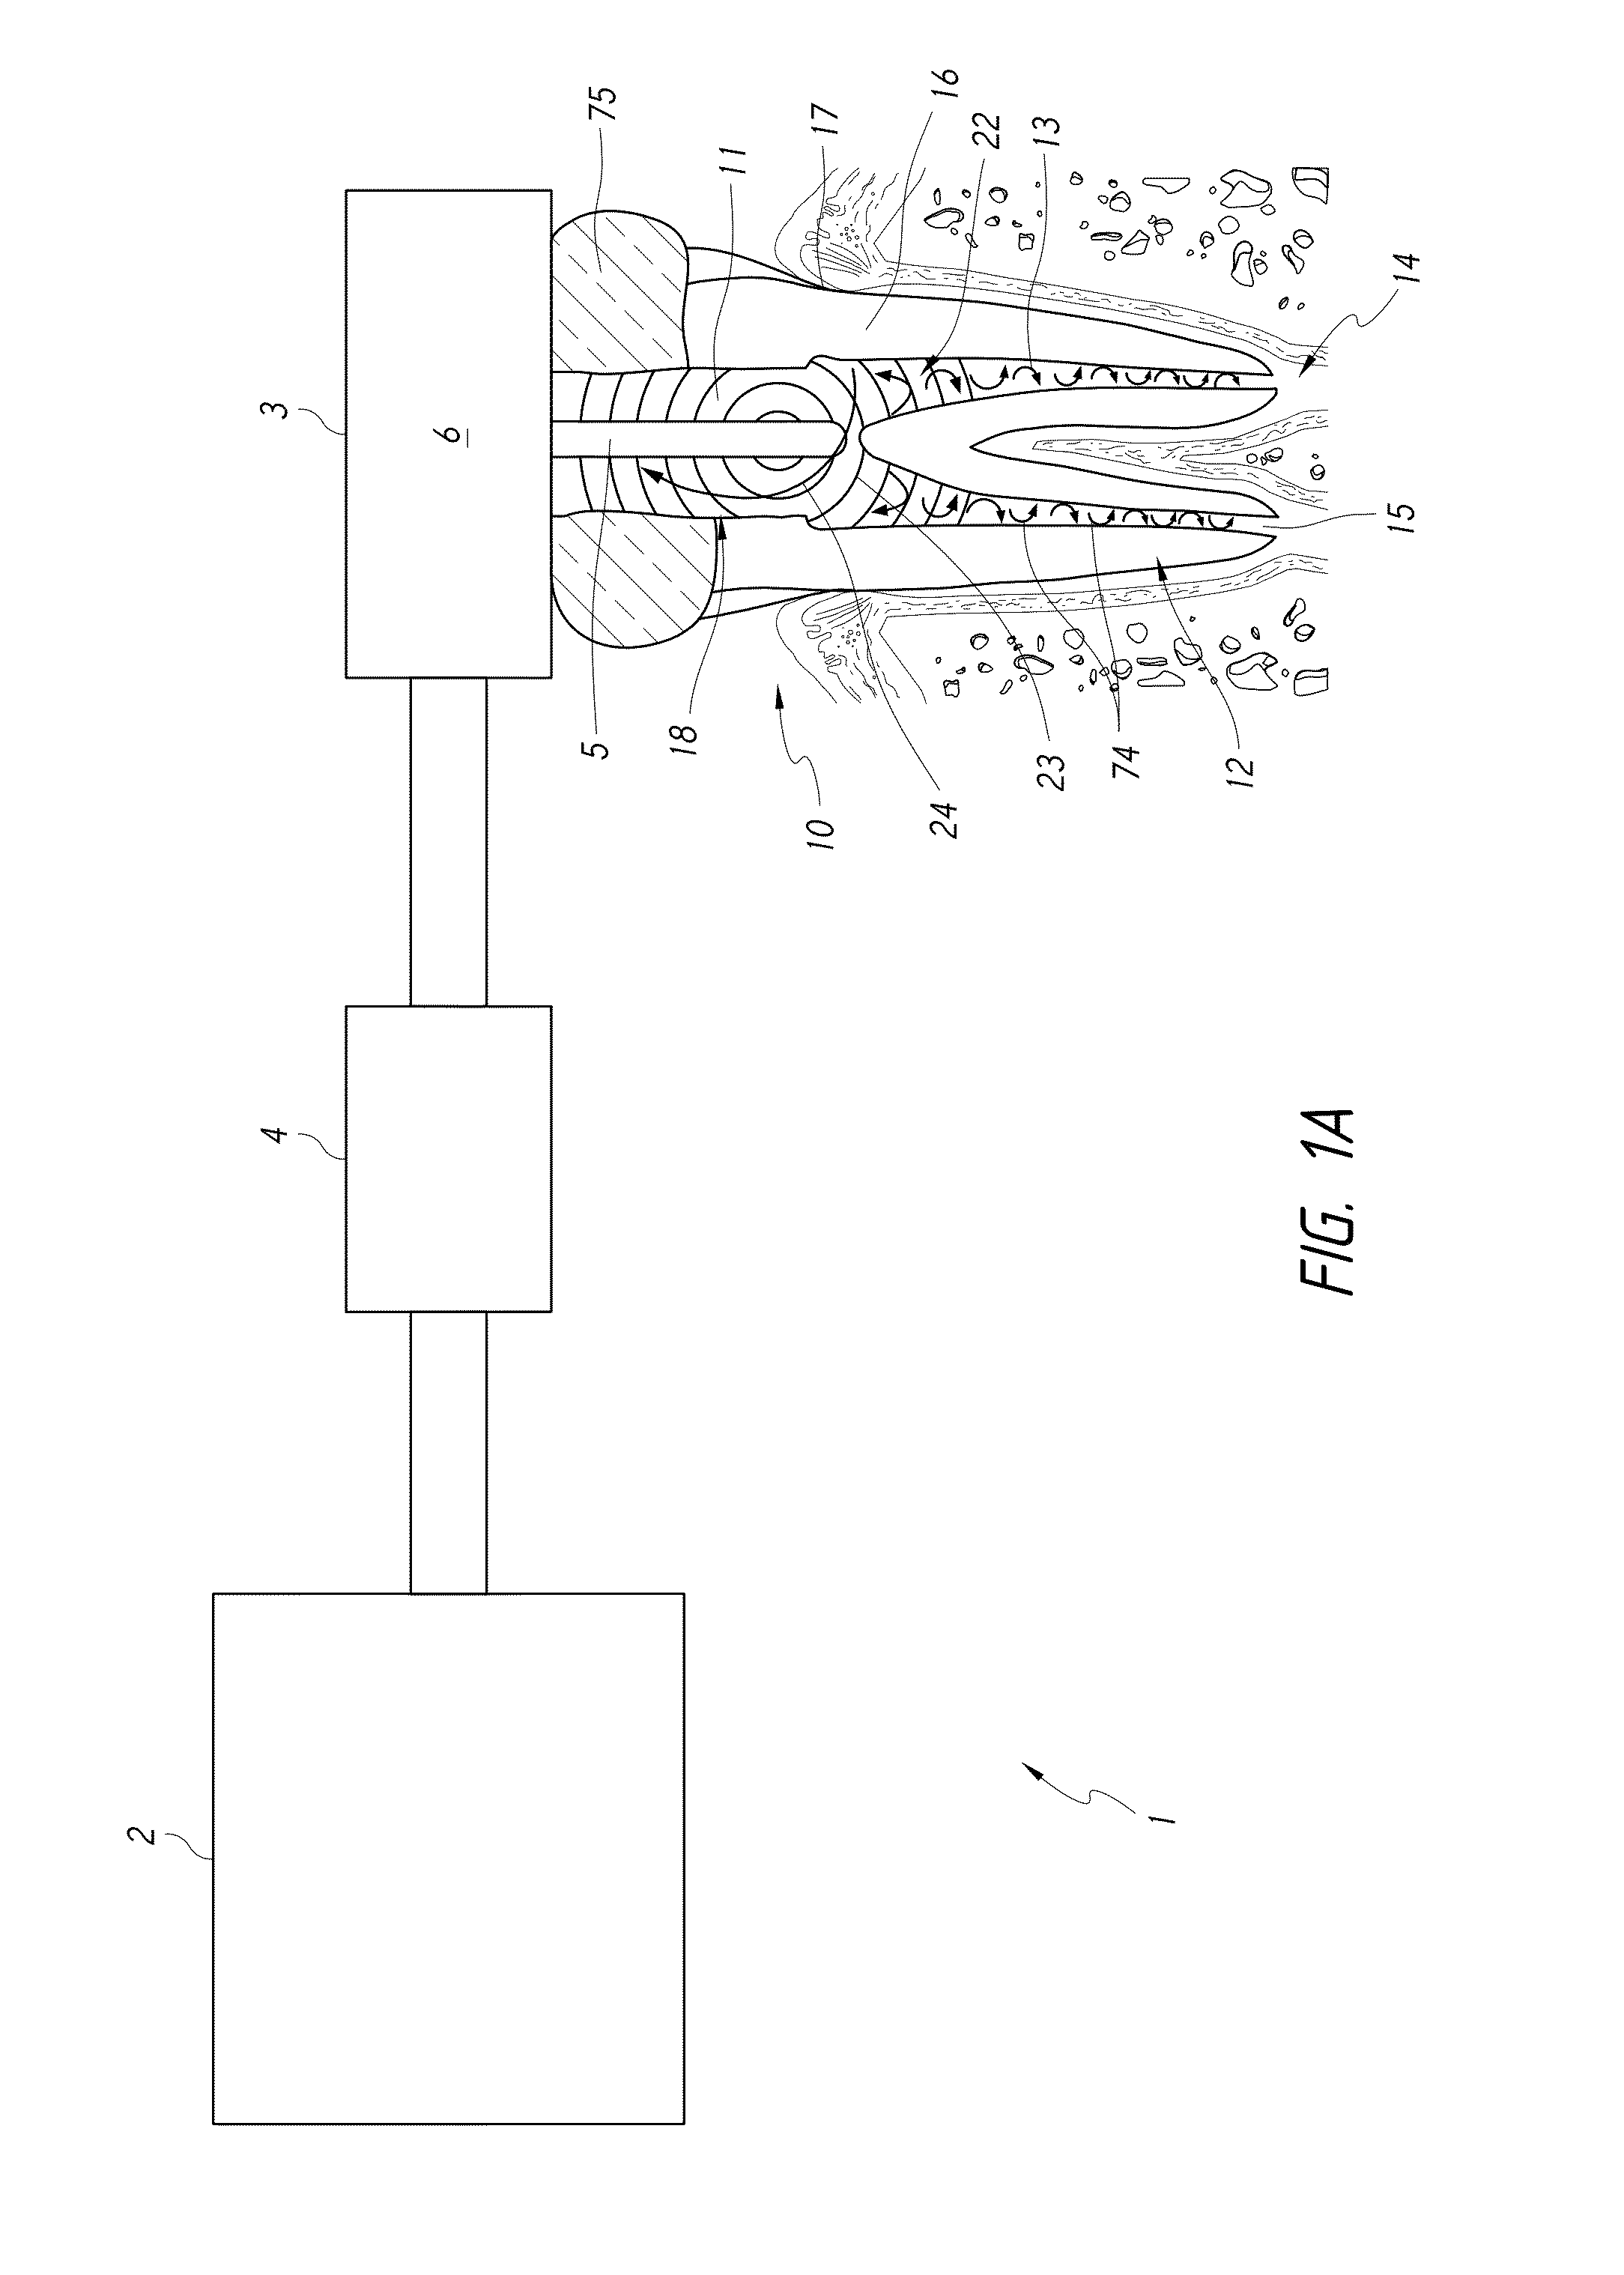 Apparatus and methods for filling teeth and root canals